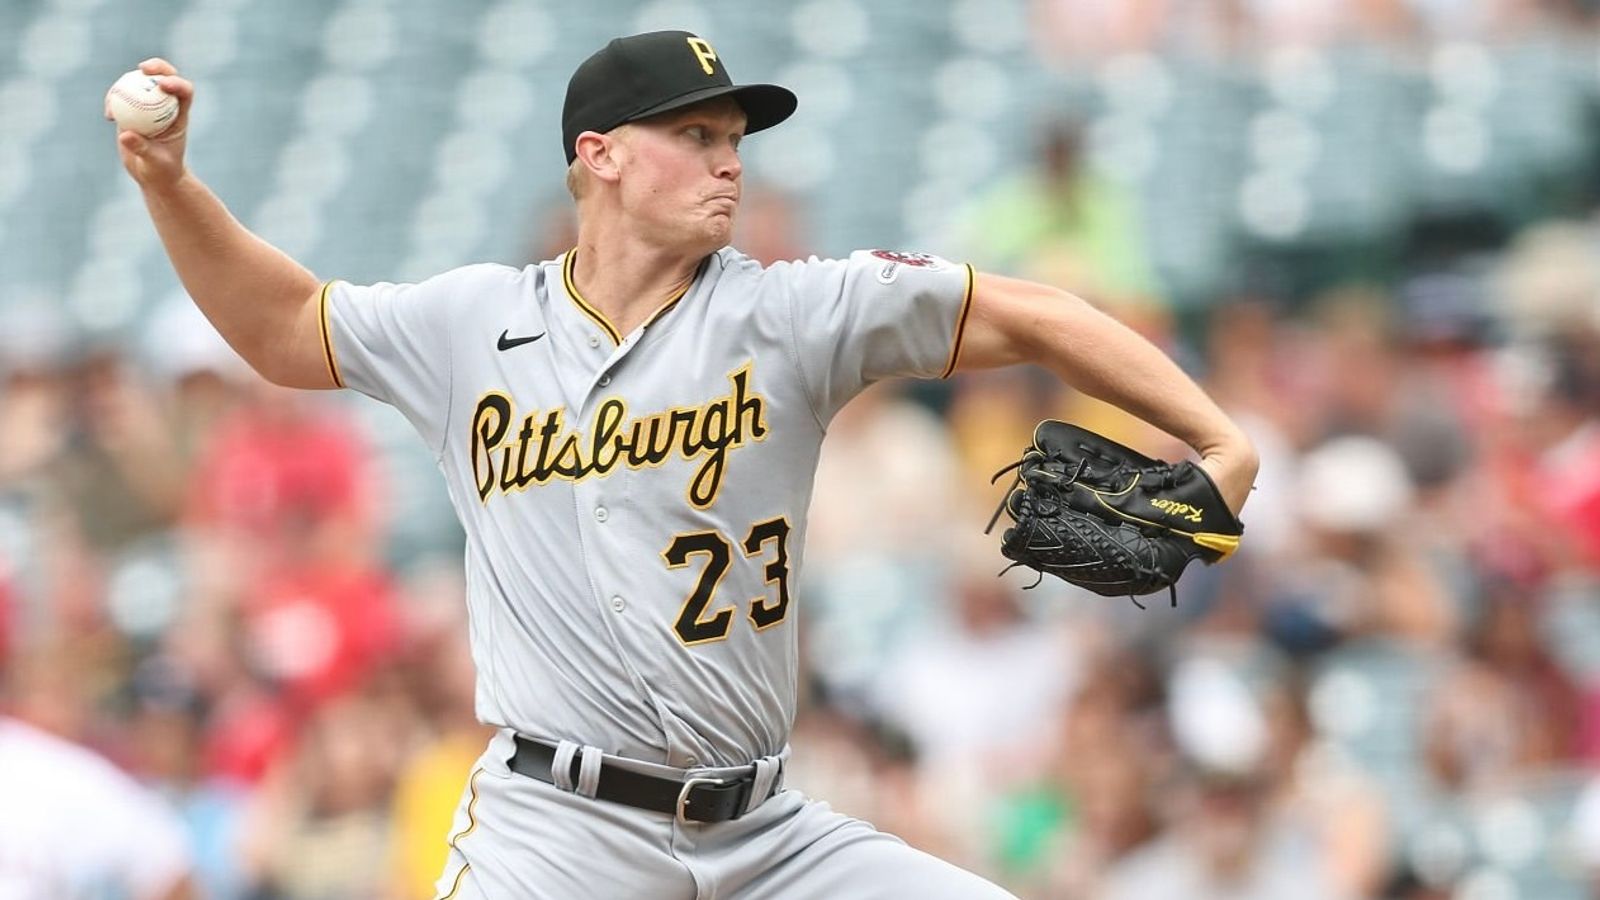 Spin zone: Pirates pitchers using off-speed stuff at league-high